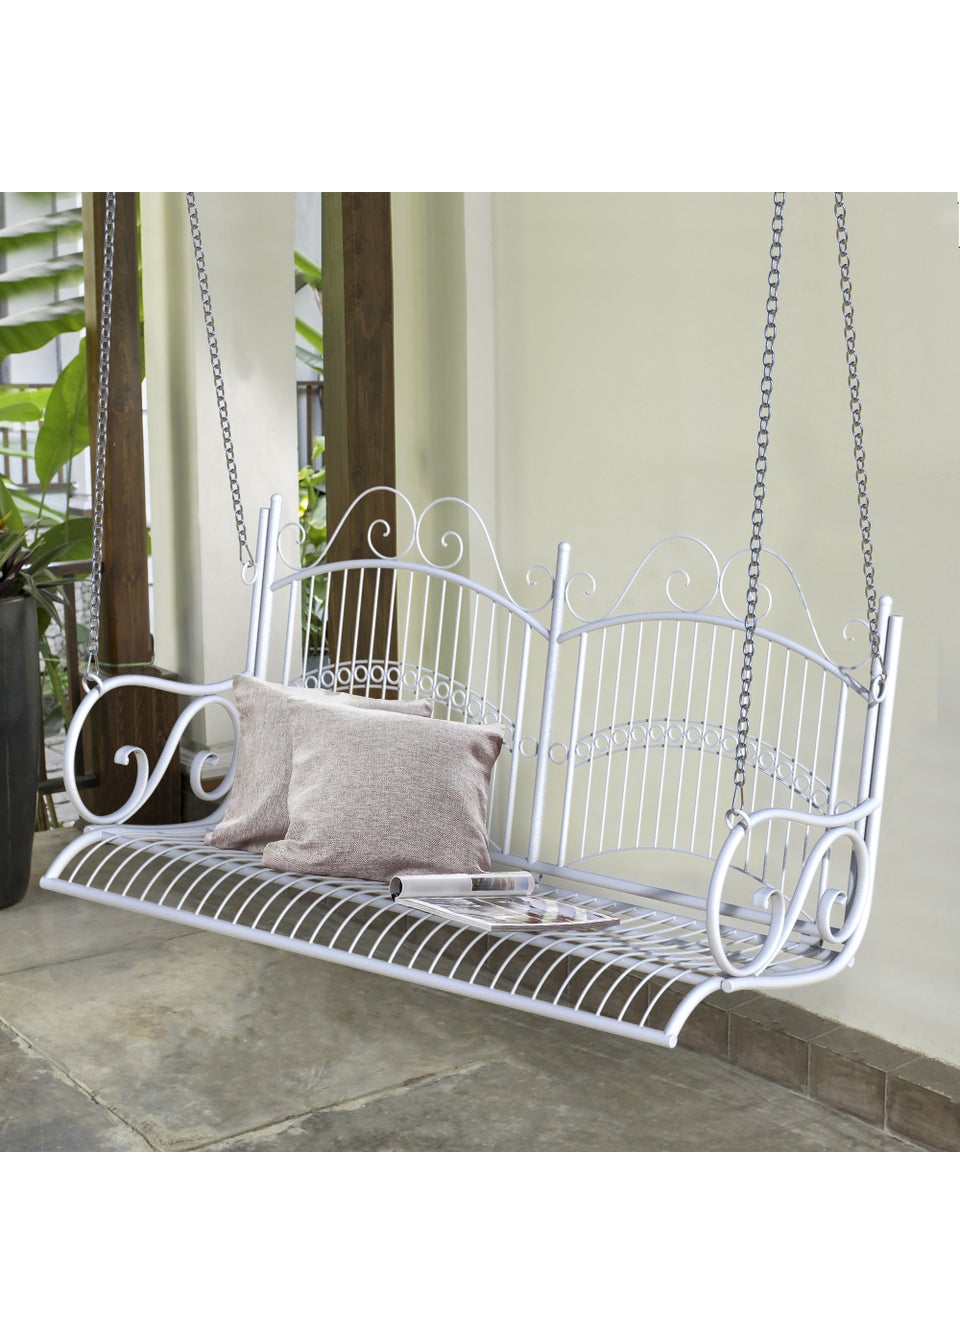 Outsunny Garden Bench Outdoor Metal 2-Seater Swing Chair Hanging Hammock 118Lx 58W x 57H cm